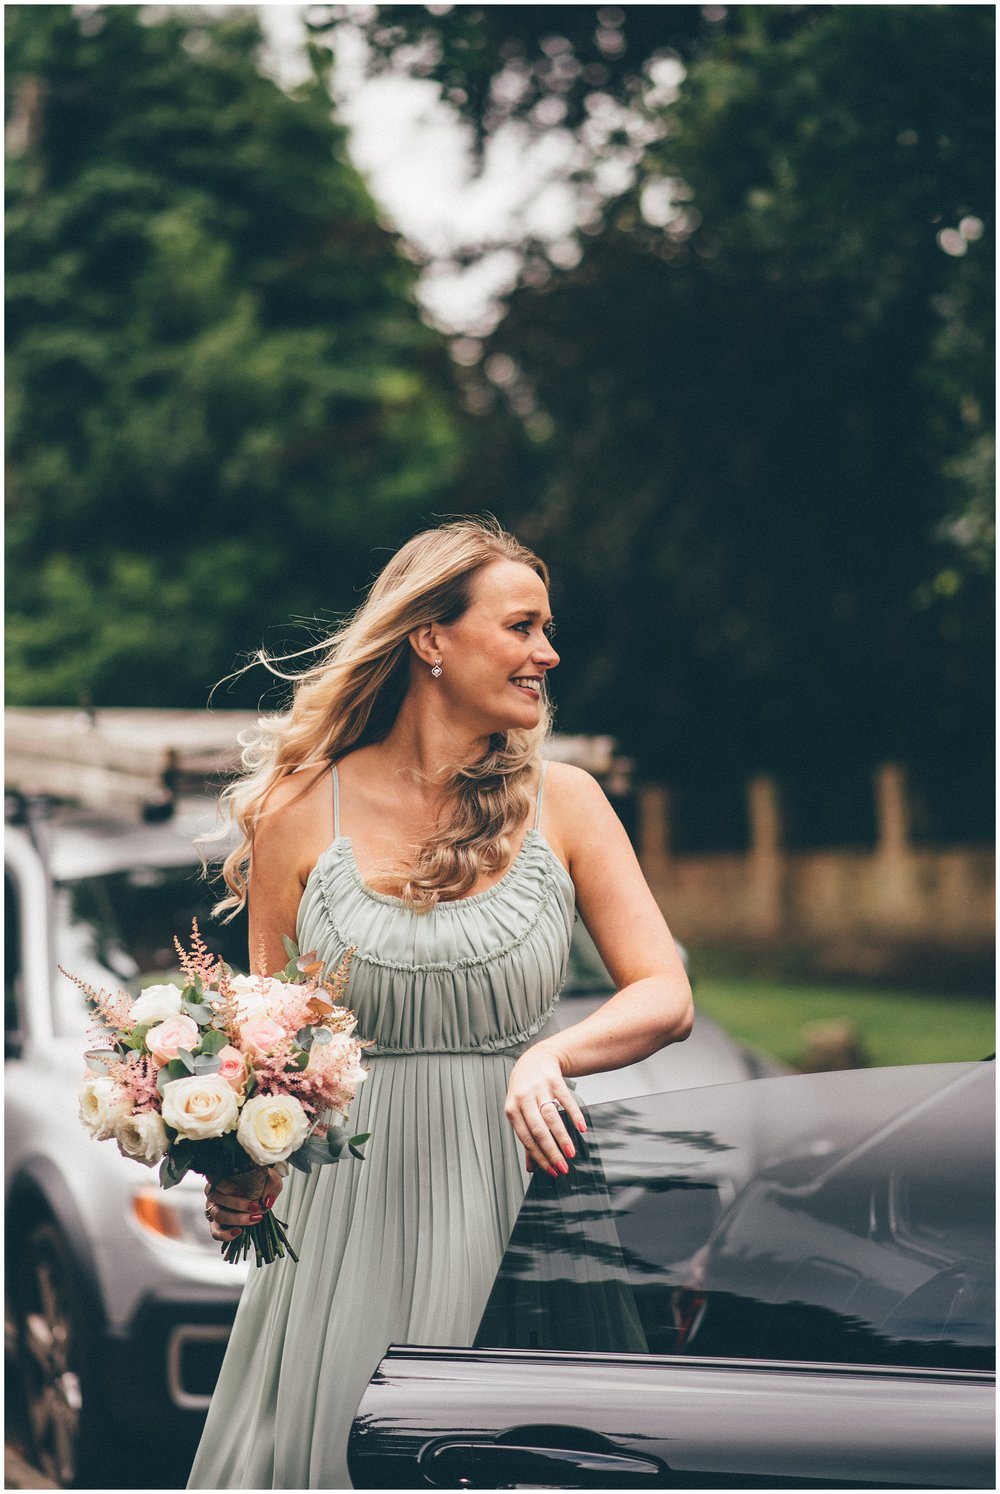 Bride arrives at her wedding ceremony in beautiful sage green dress